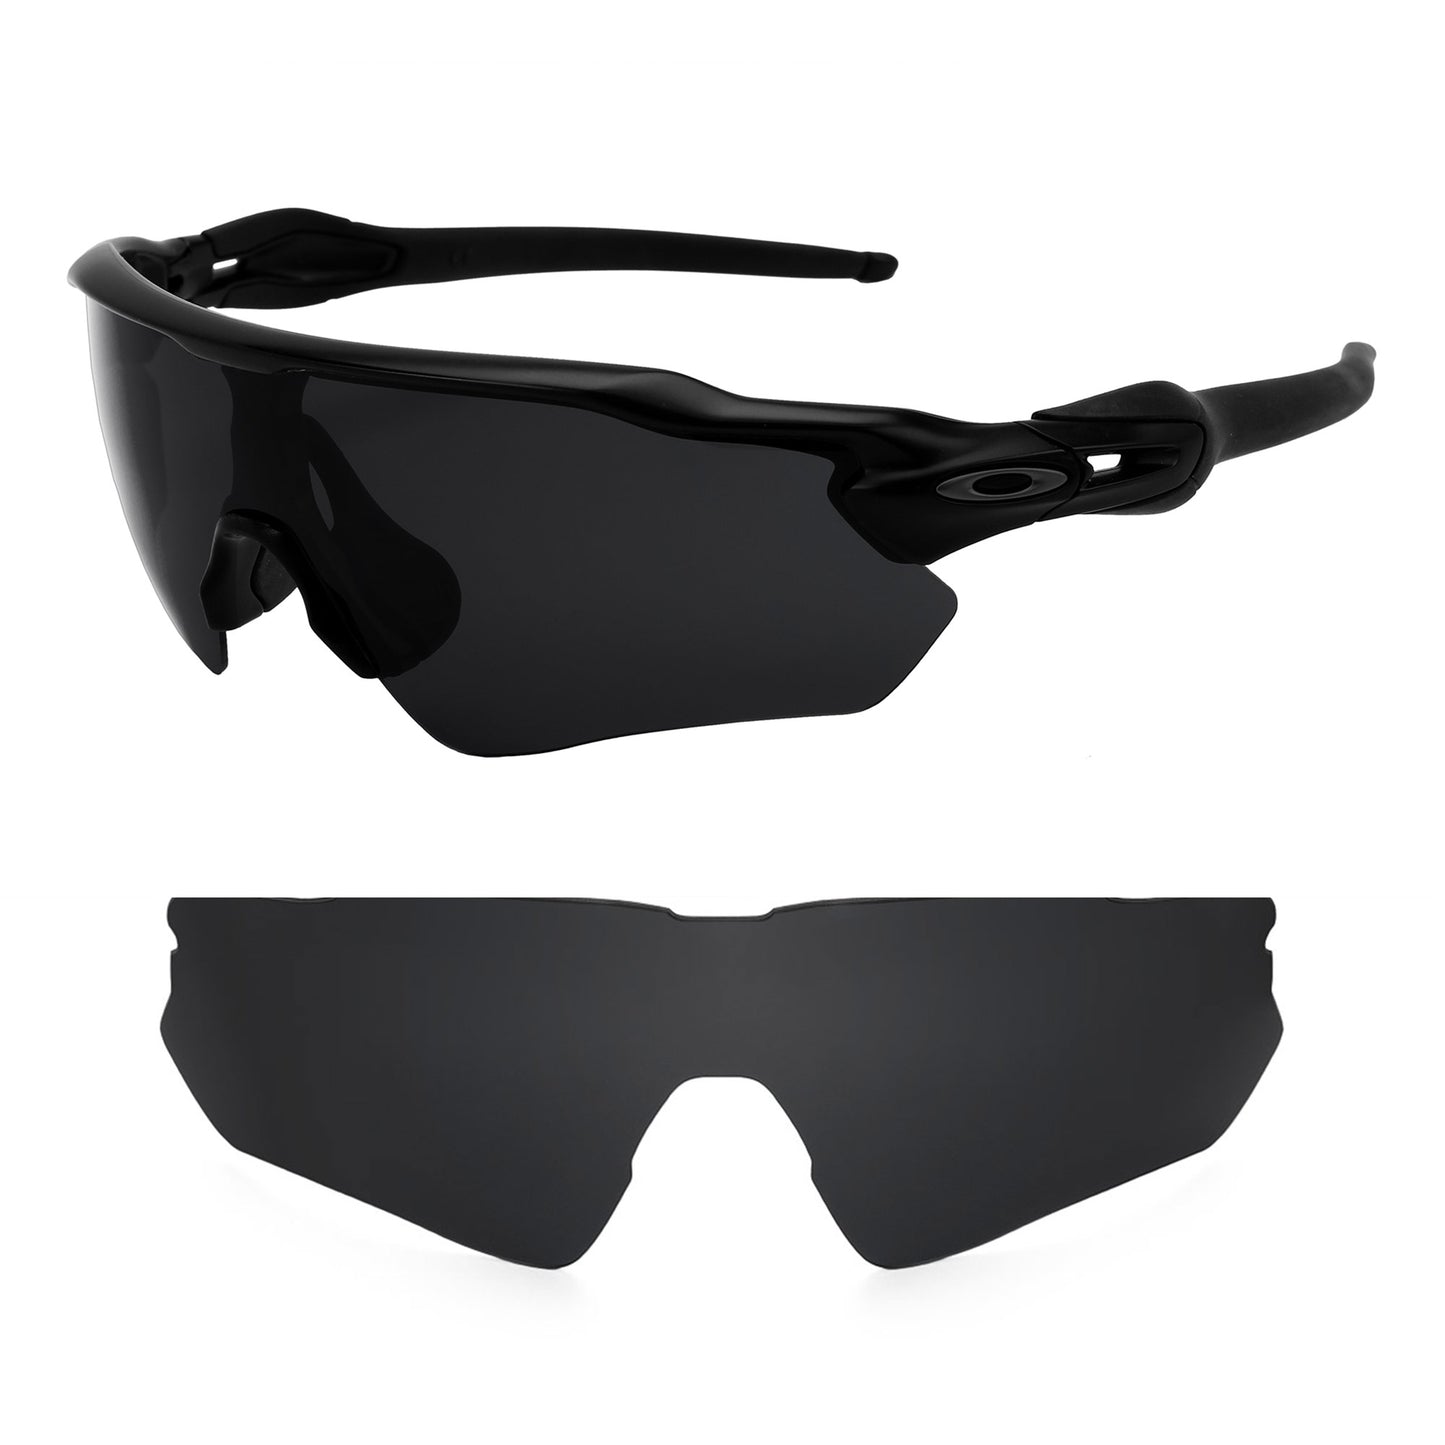 Oakley Radar EV Path sunglasses with replacement lenses